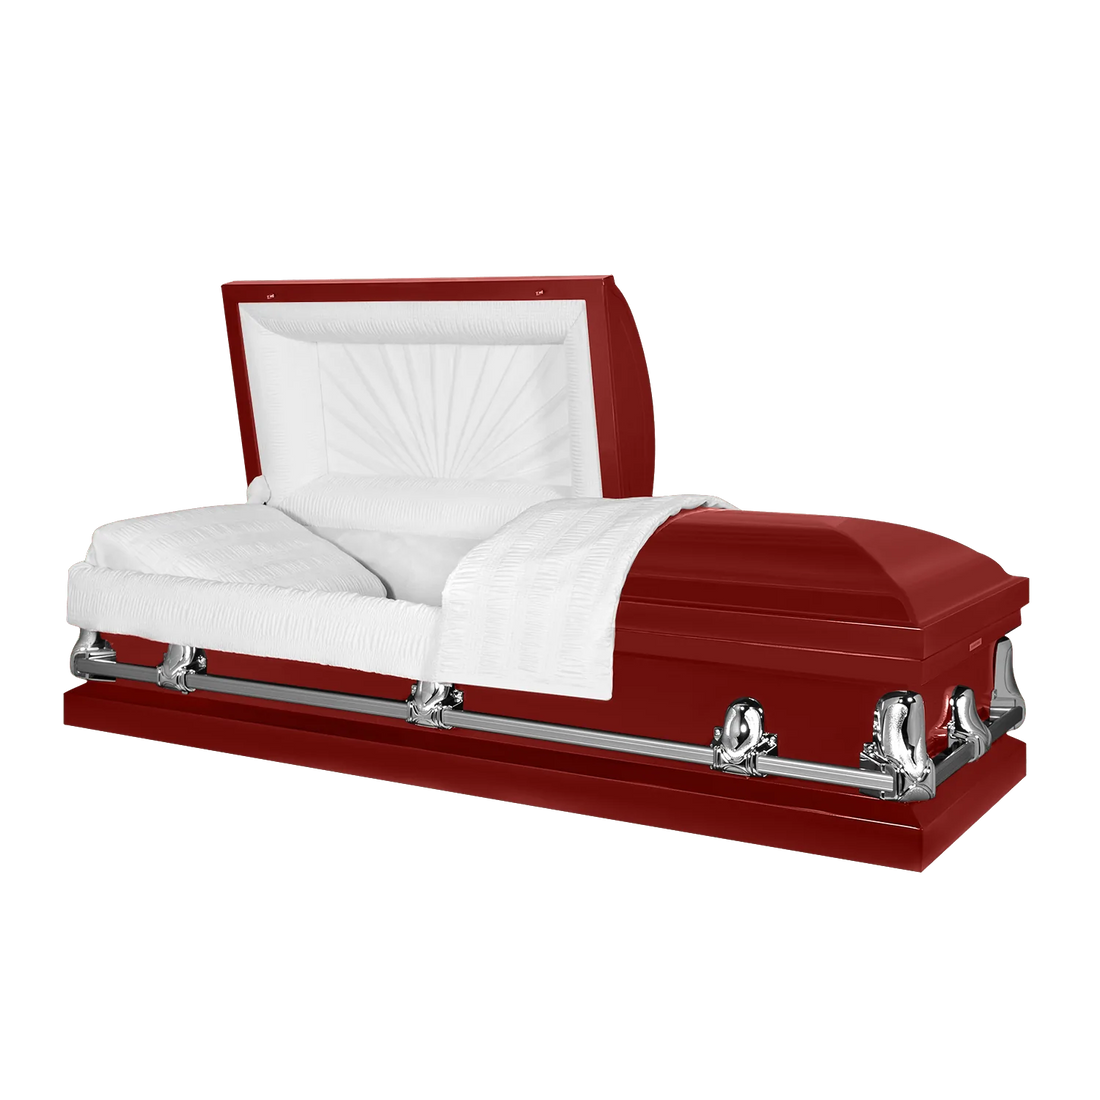 When And How To Buy A Red Color Casket Online?